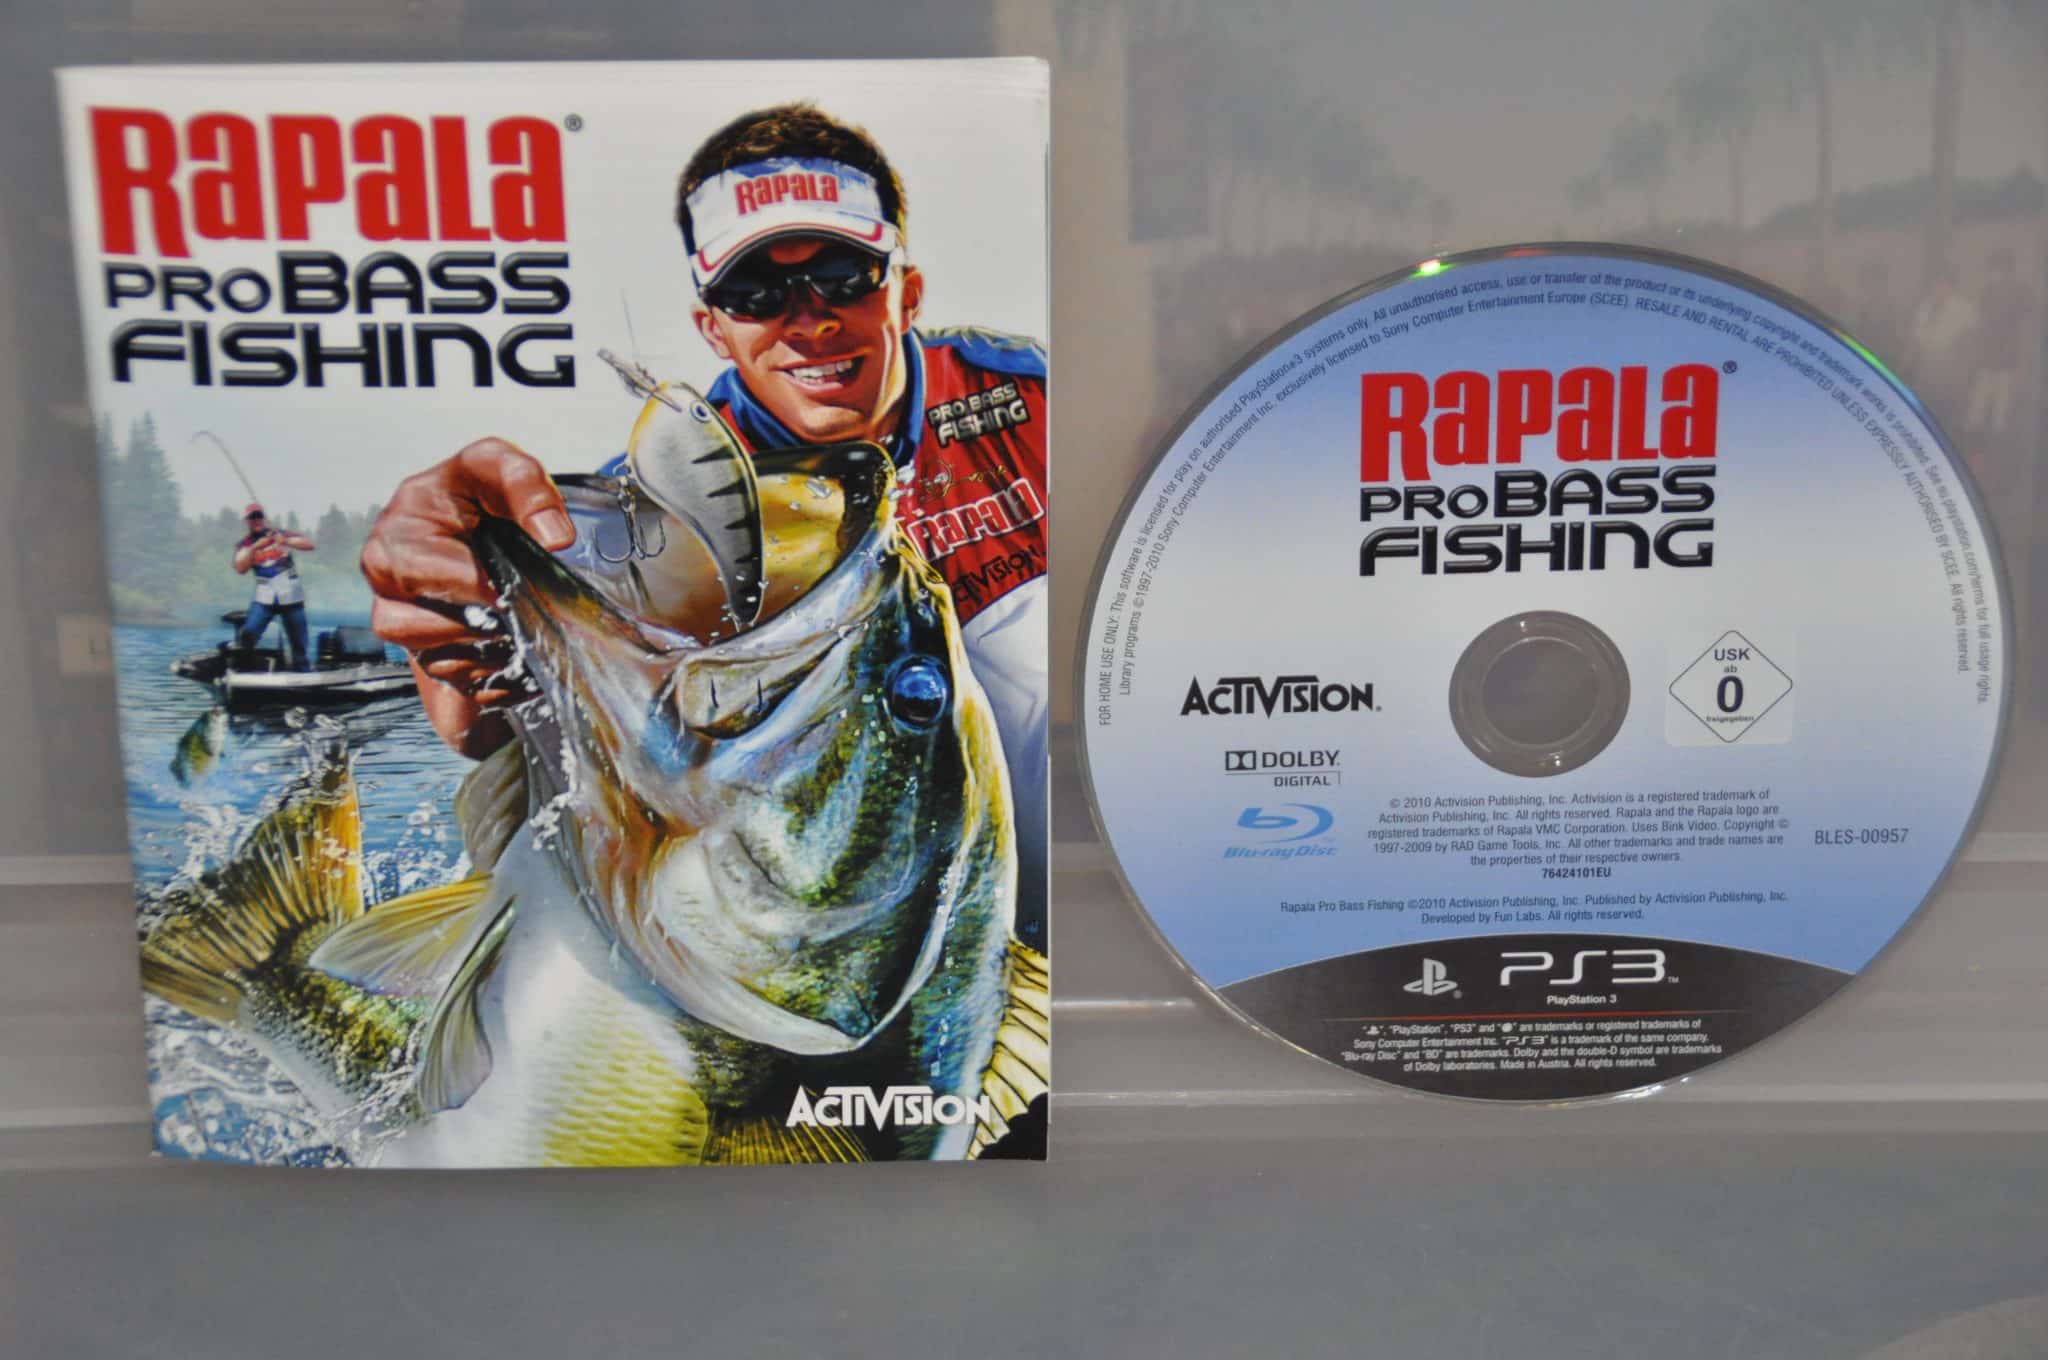 PS3 Rapala Pro Bass Fishing Game & Activision Controller Reel